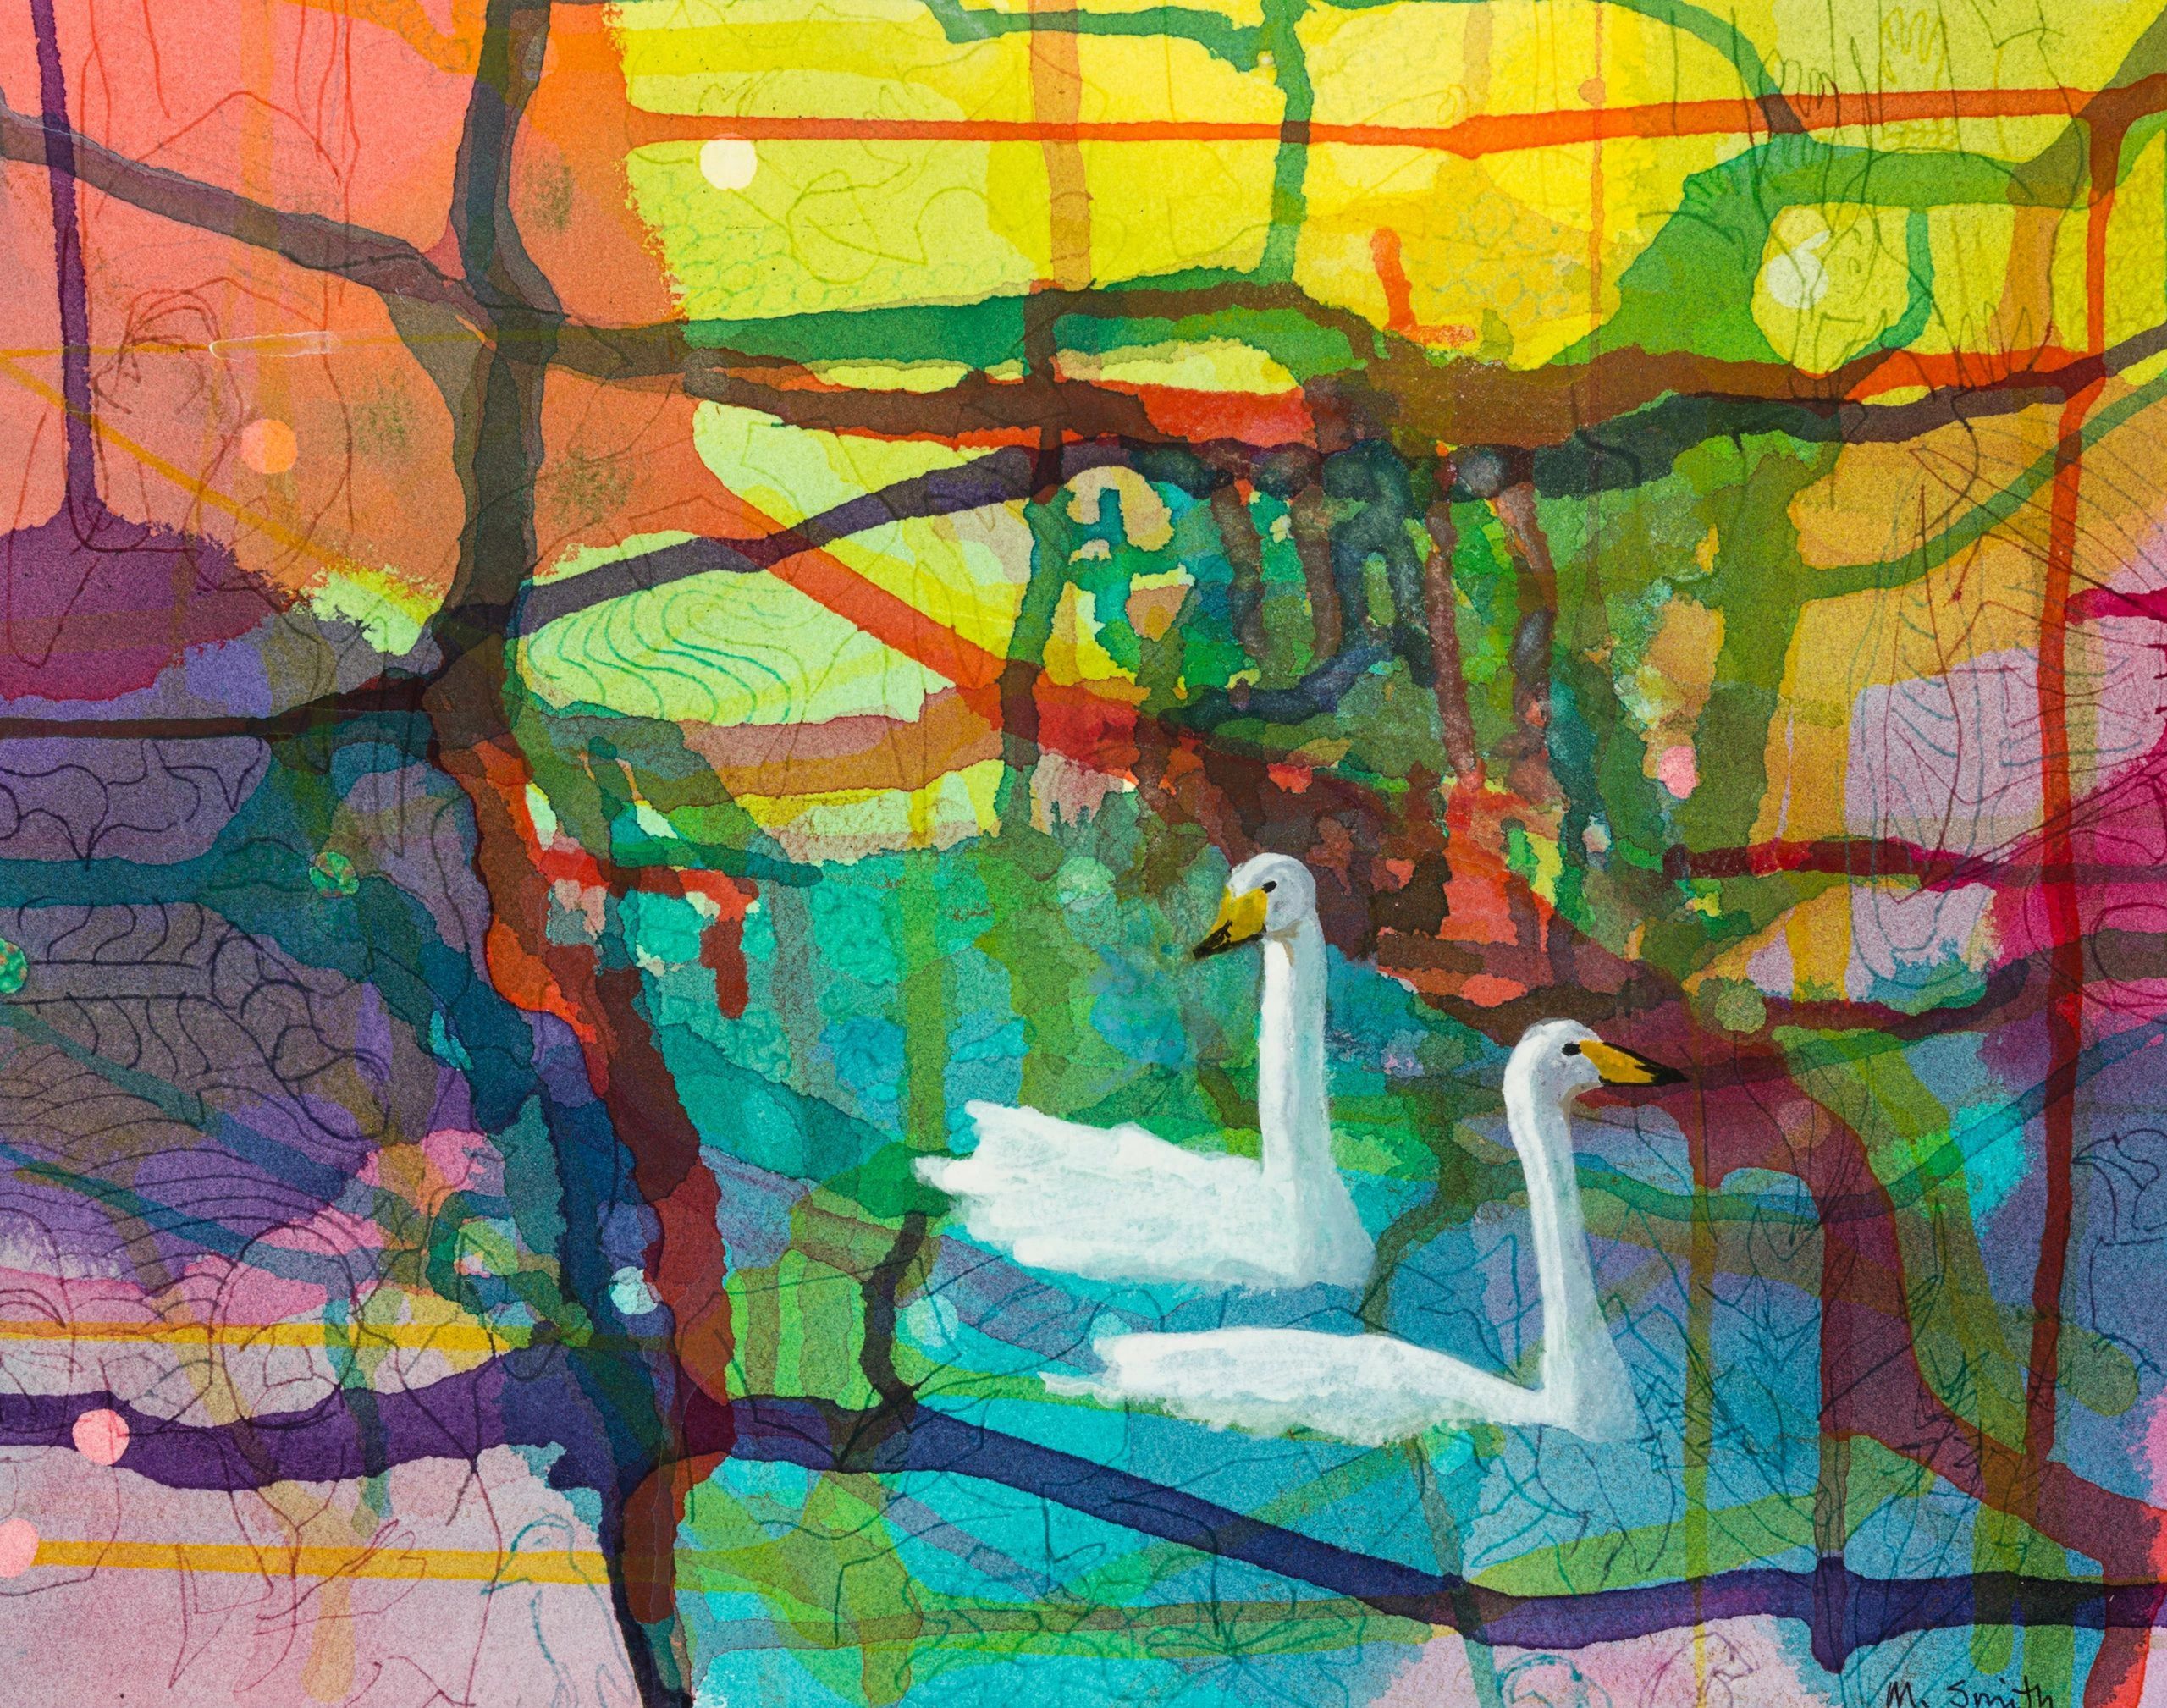 two swans swimming in an abstract background